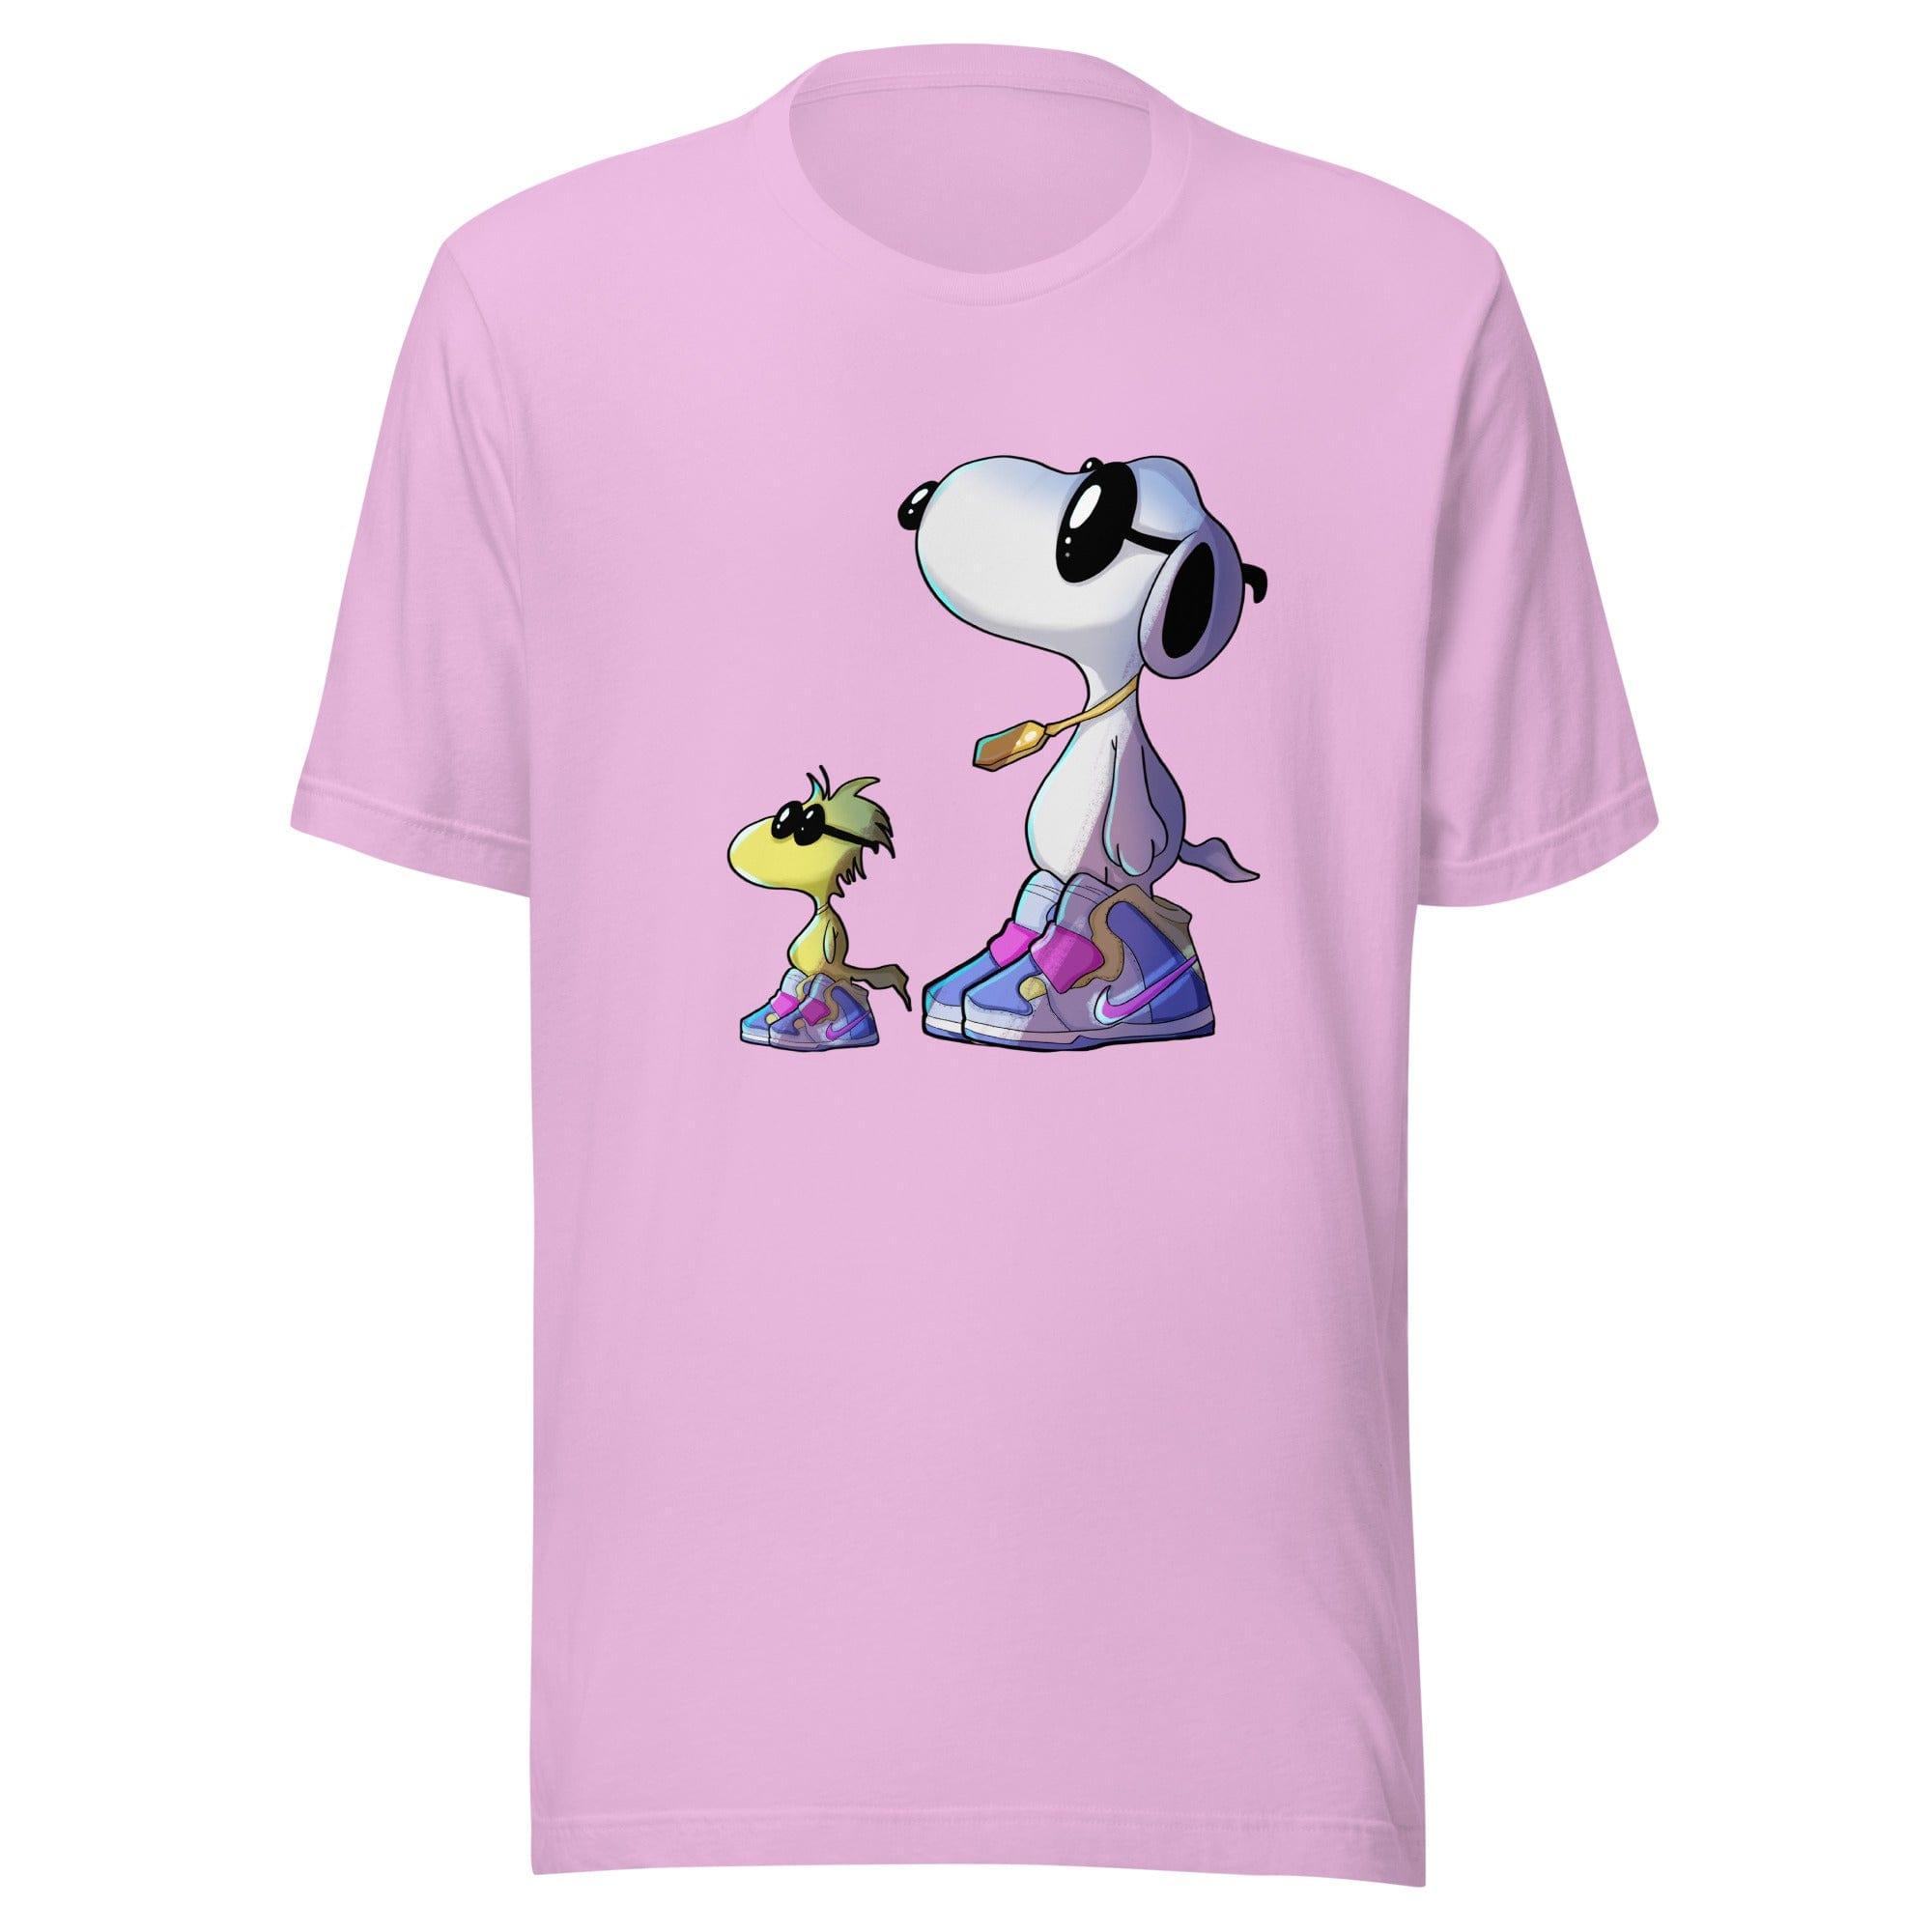 Snoopy T-shirt With Pal Woodstock in Shades and Jordan's - TopKoalaTee